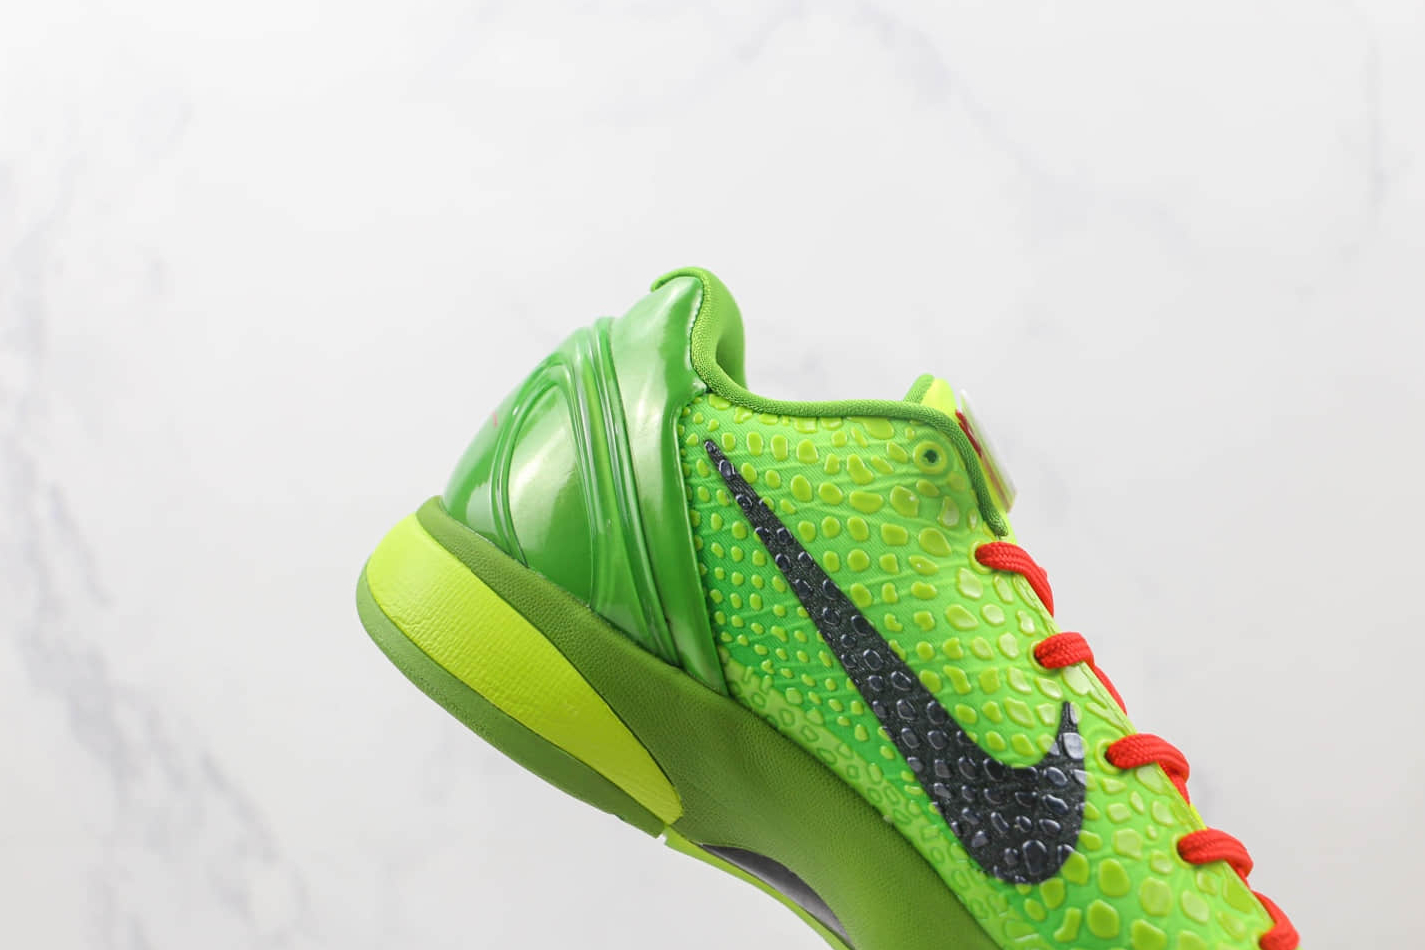 Nike Zoom Kobe 6 Protro 'Grinch' CW2190-300 - Limited Edition Sneakers